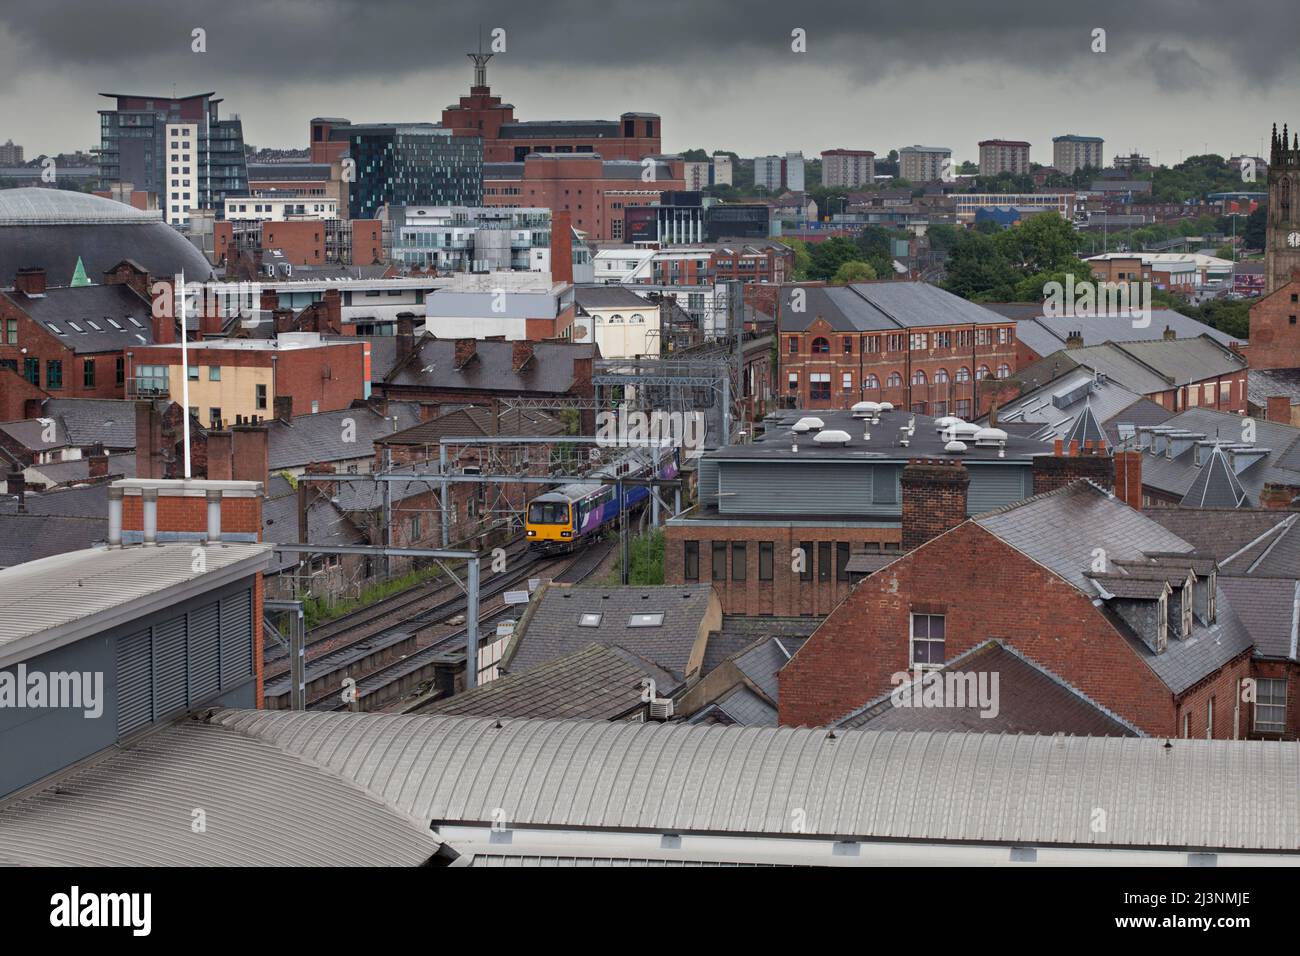 Northern rail class 144 pacer train running through the urban landscape in Leeds city centre Stock Photo